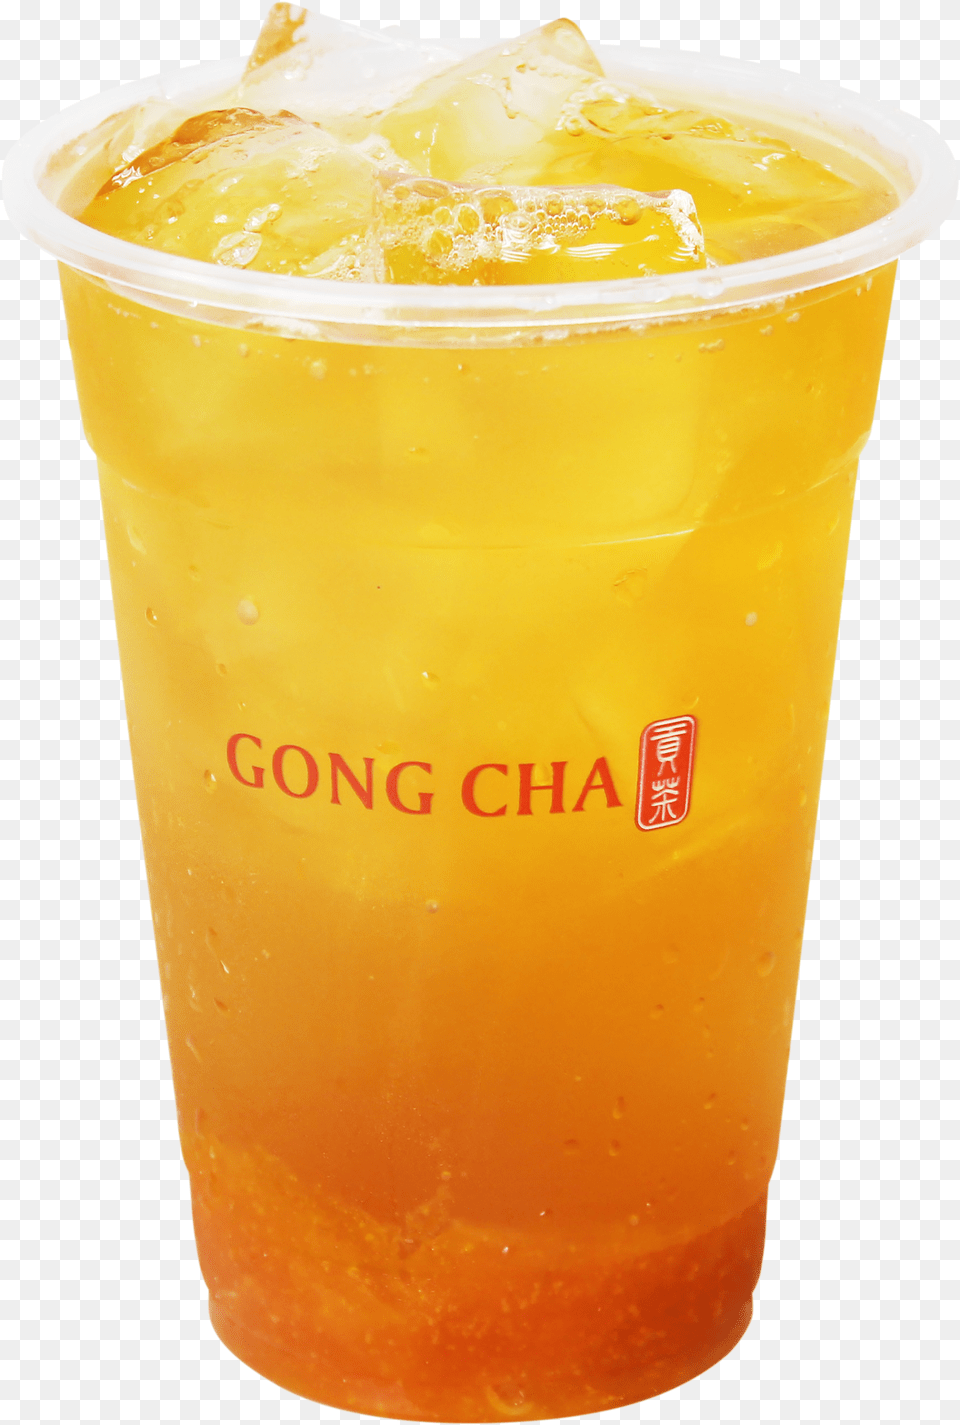 Gong Cha Png